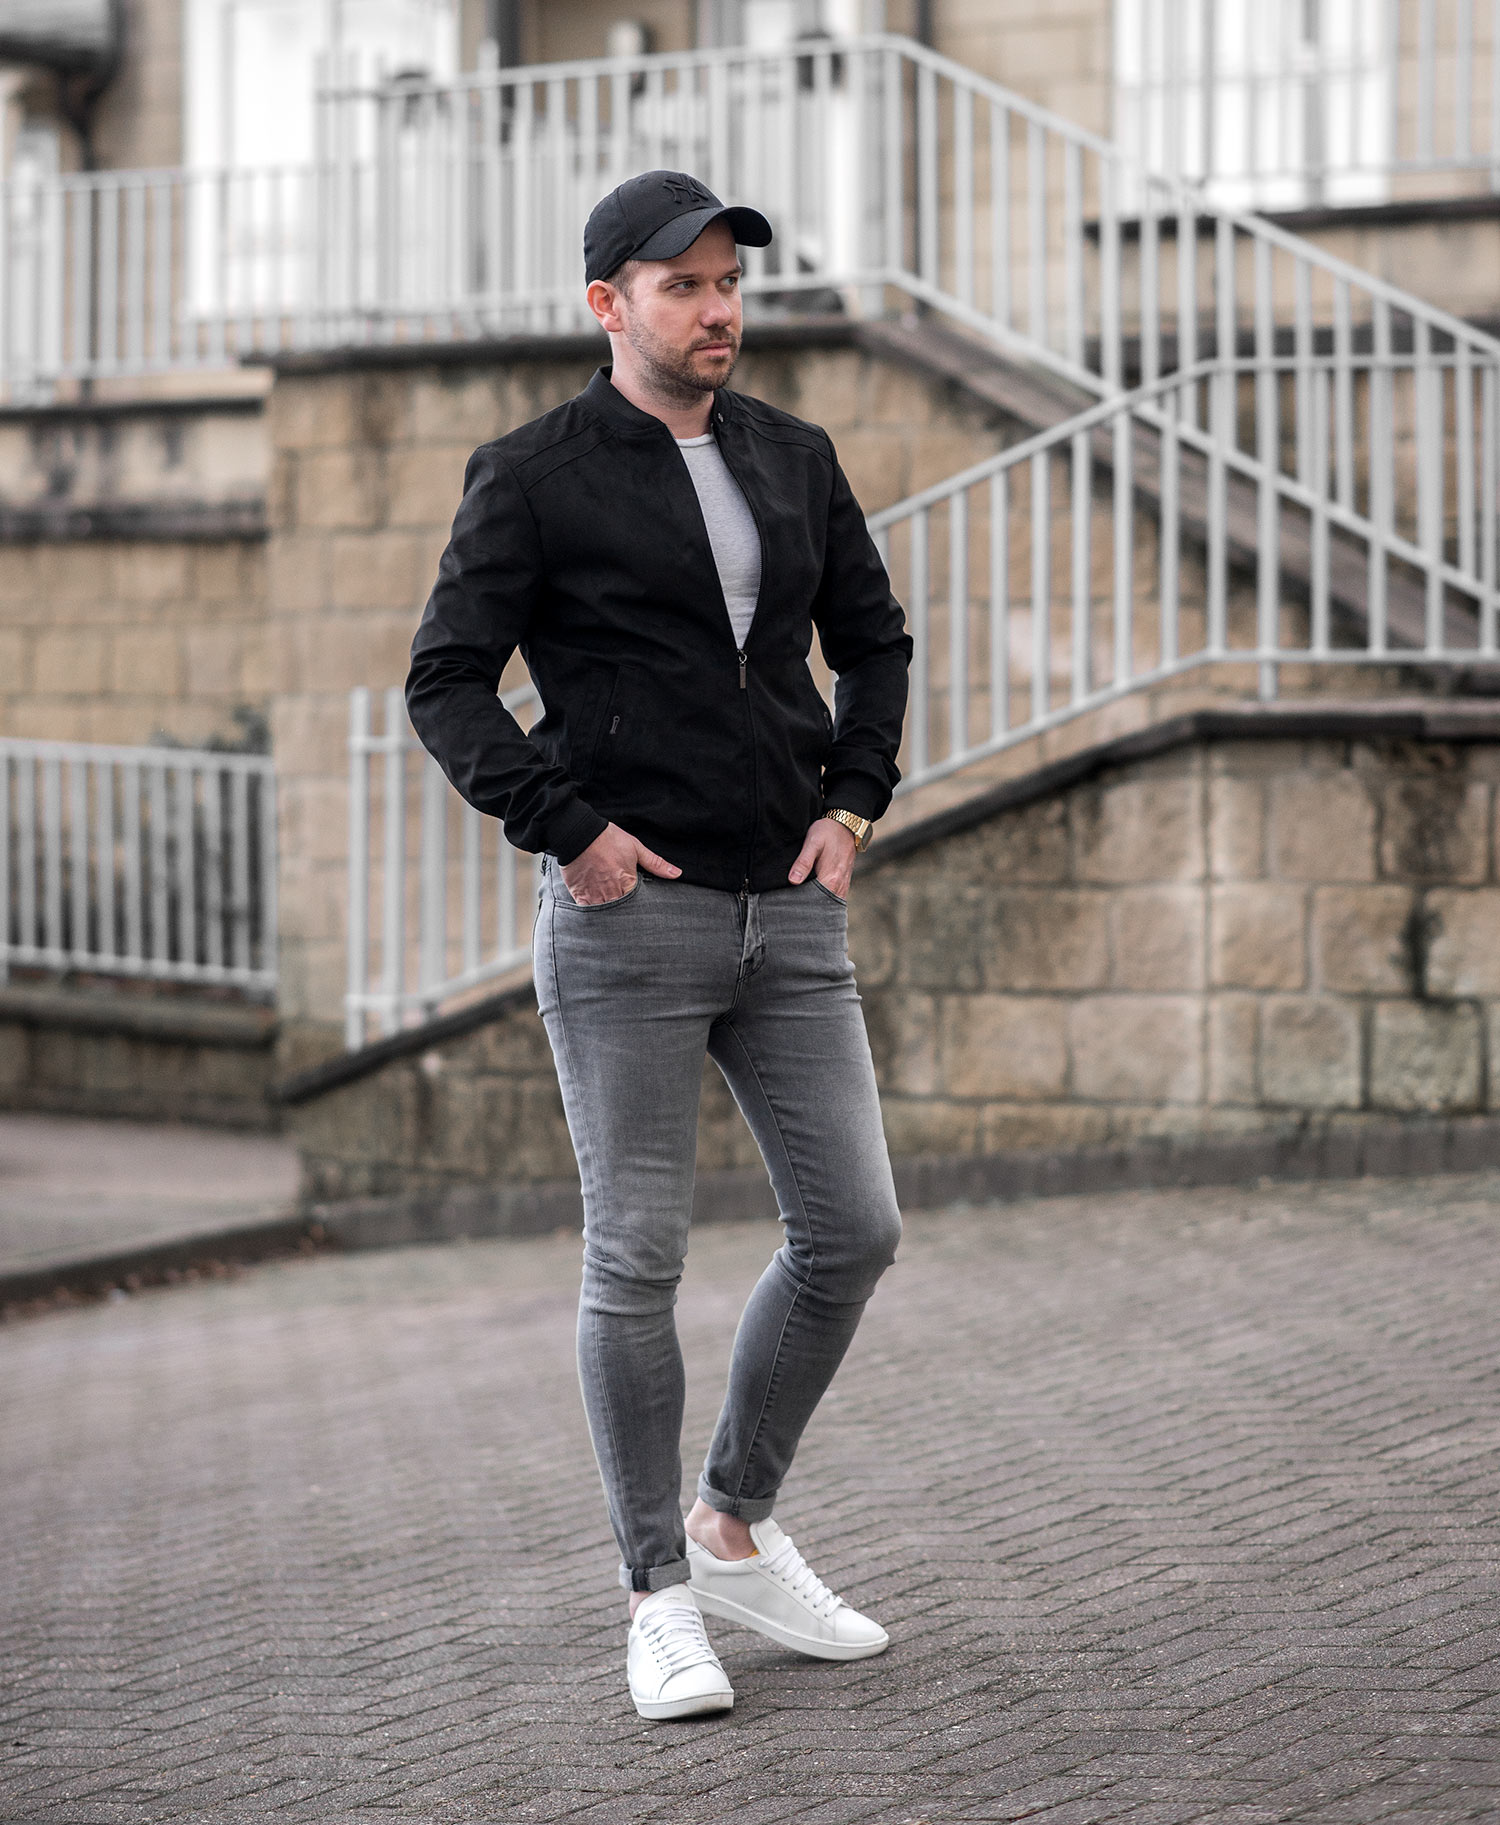 Styling A Black Suede Bomber Jacket | Your Average Guy